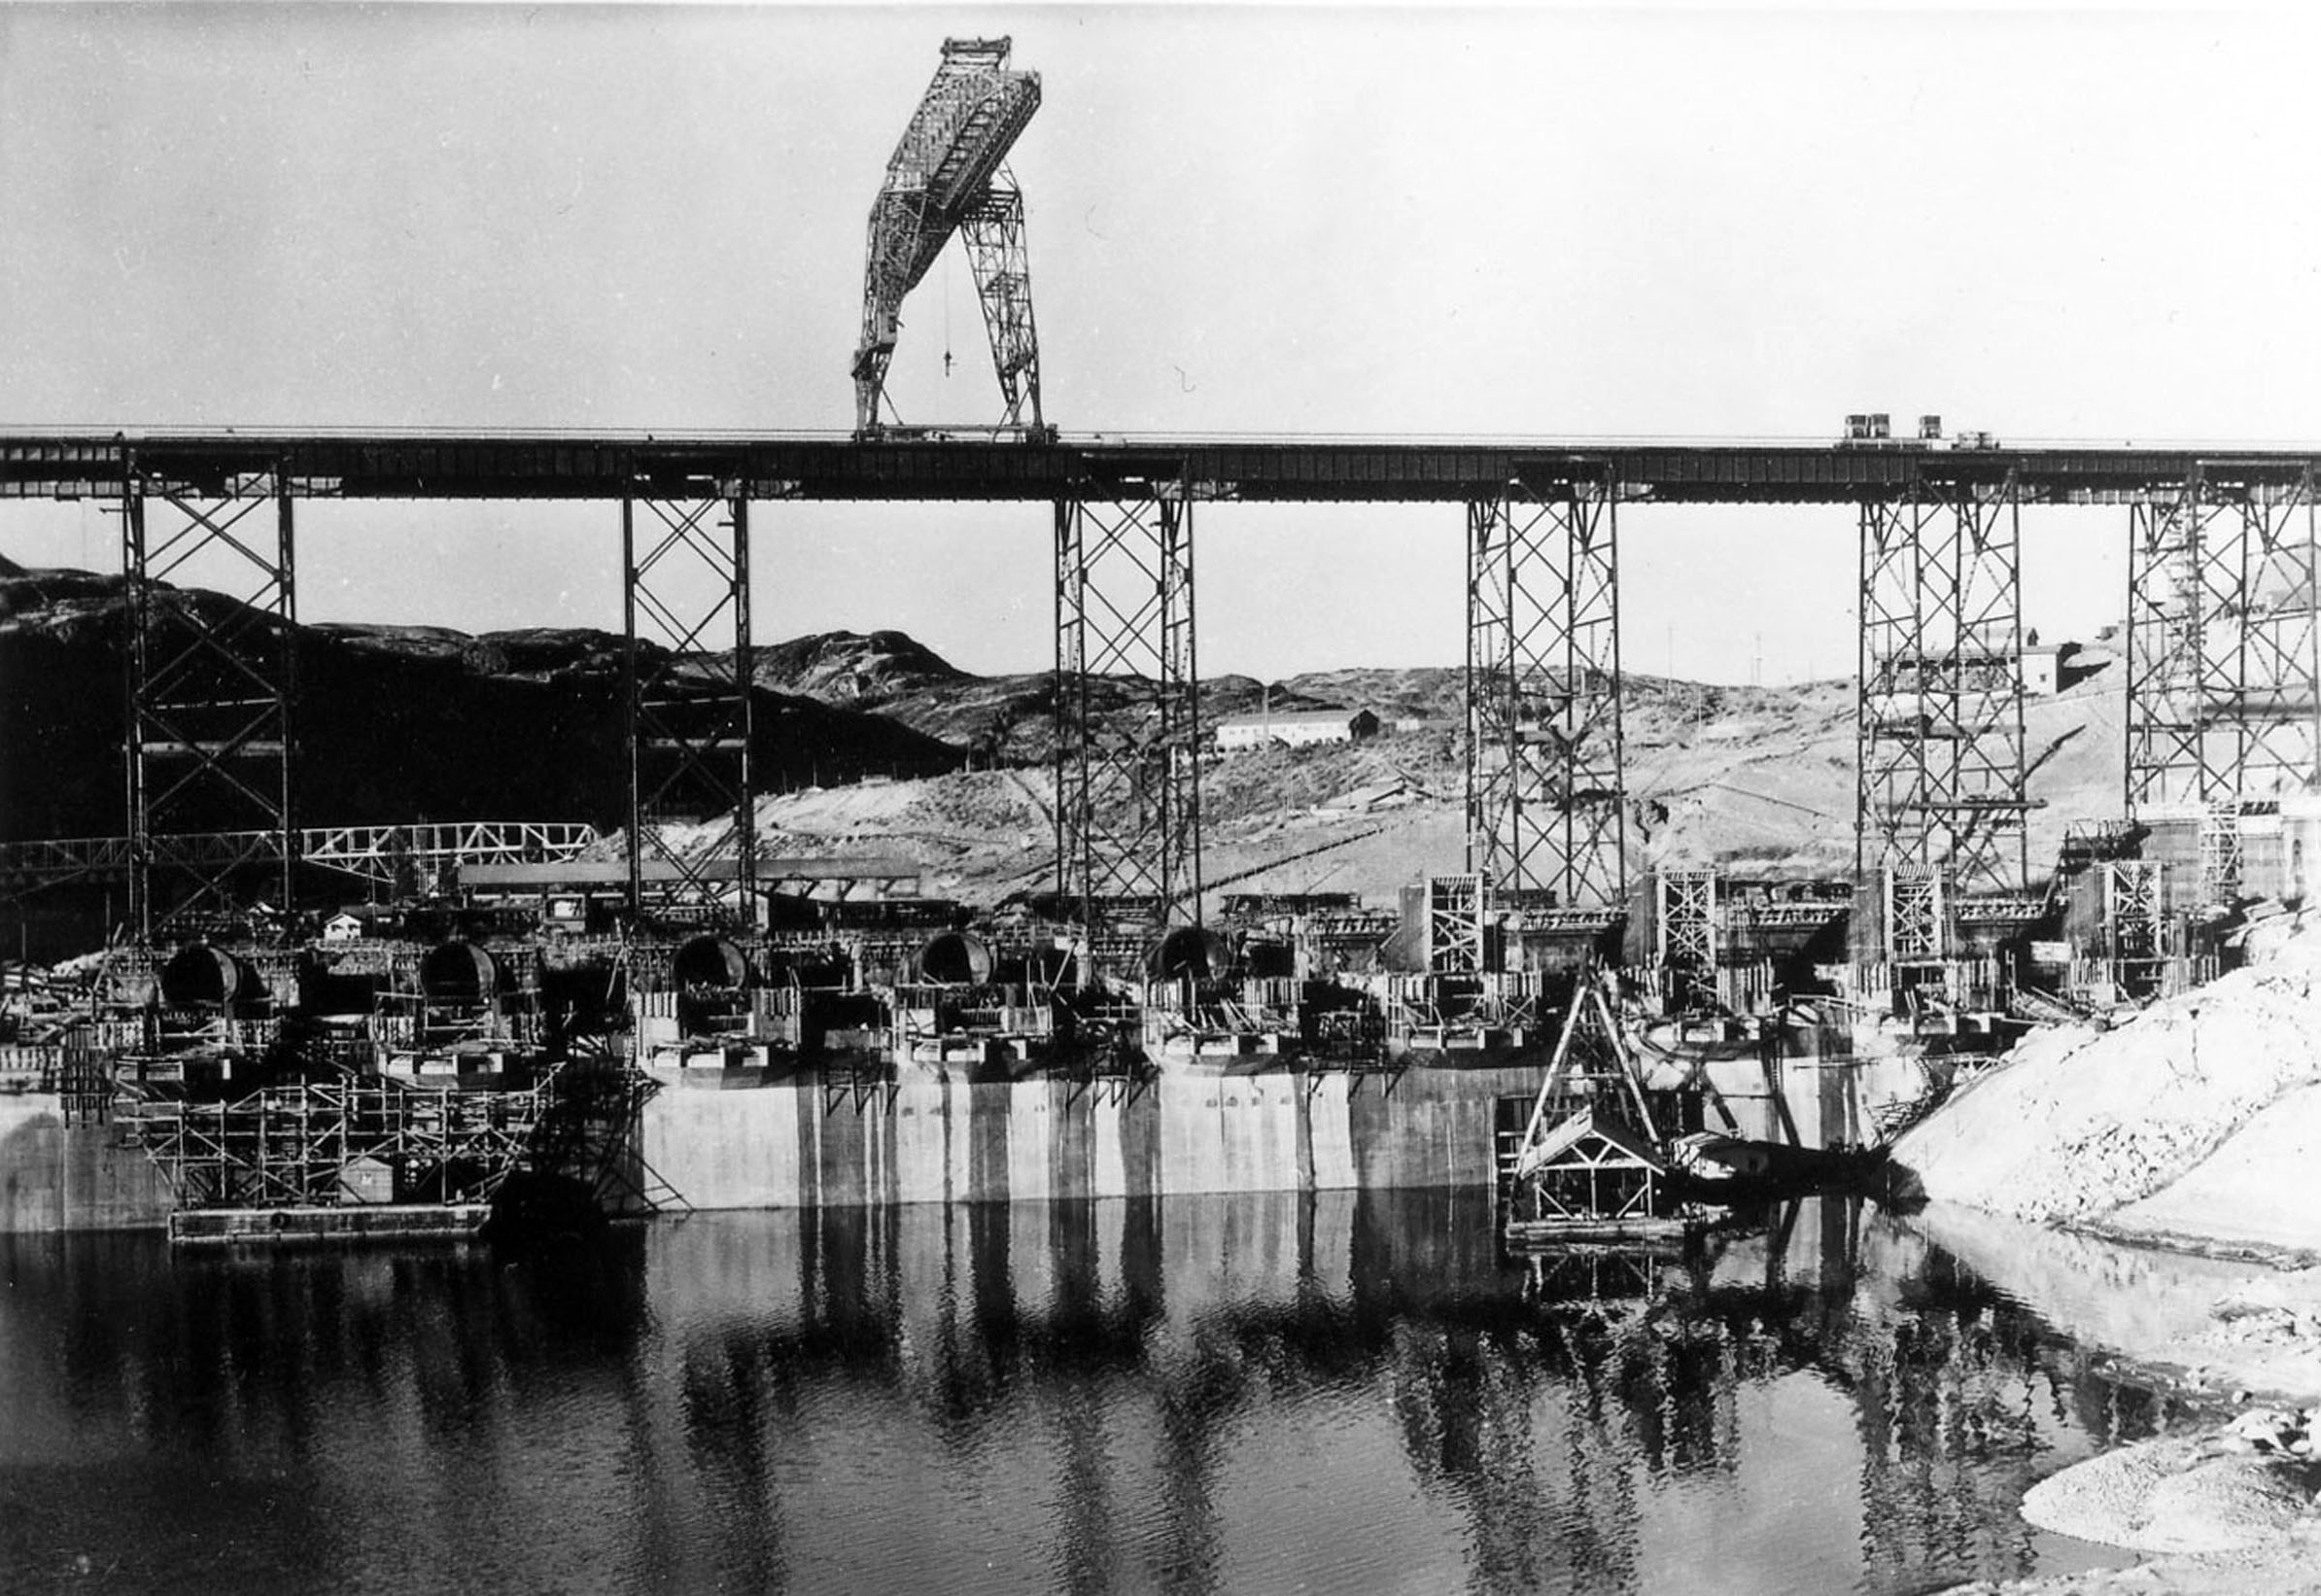 Photo taken November 21, 1938. The high crane trestle at elevation 1180 at Grand Coulee Dam.